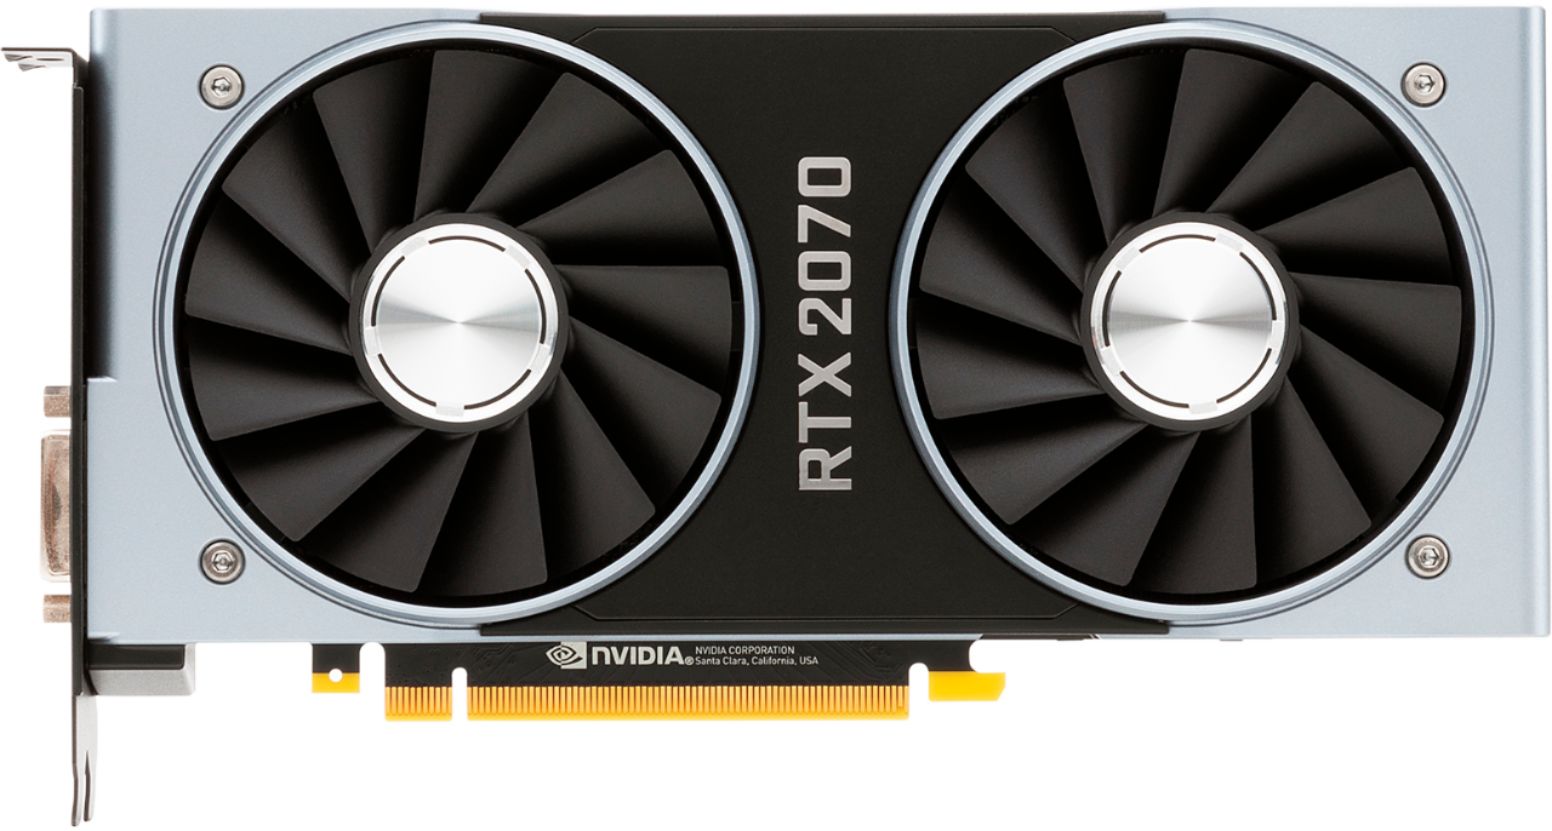 kode hvile moderat NVIDIA GeForce RTX 2070 Founders Edition 8GB GDDR6 PCI Express 3.1 Graphics  Card 9001G1602550000 - Best Buy